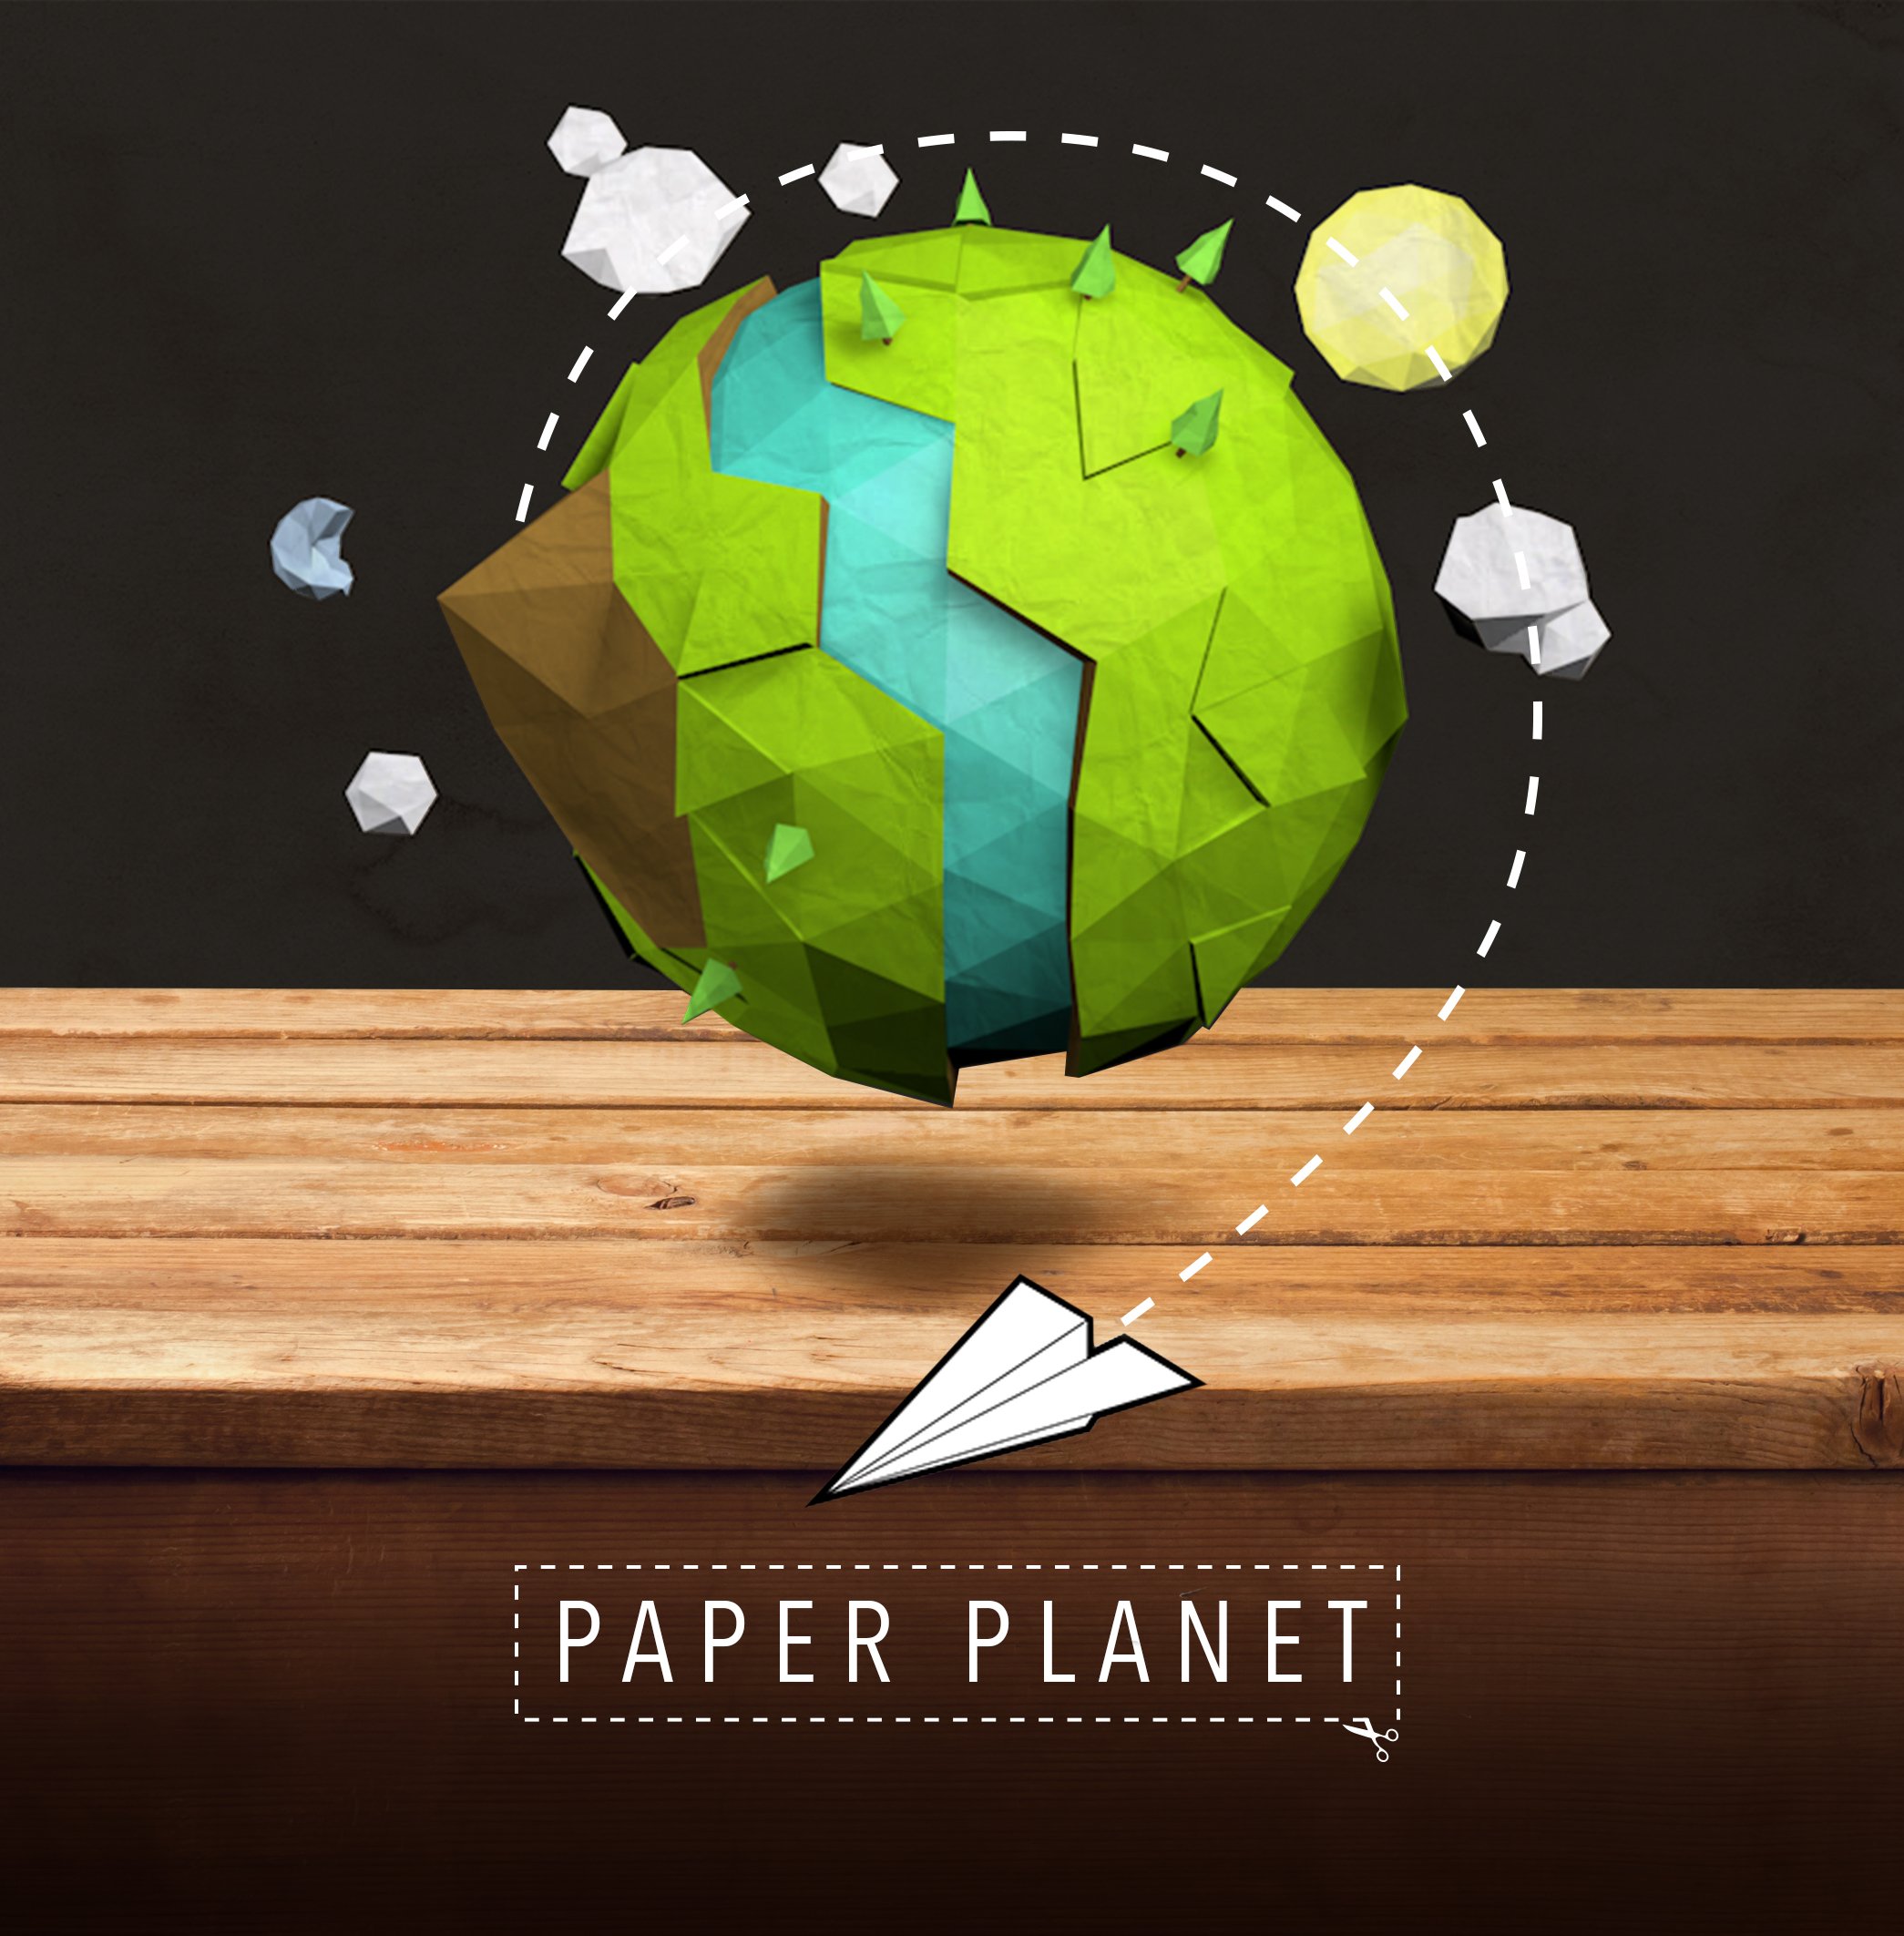 More information about "Event #86 Paper Planet"